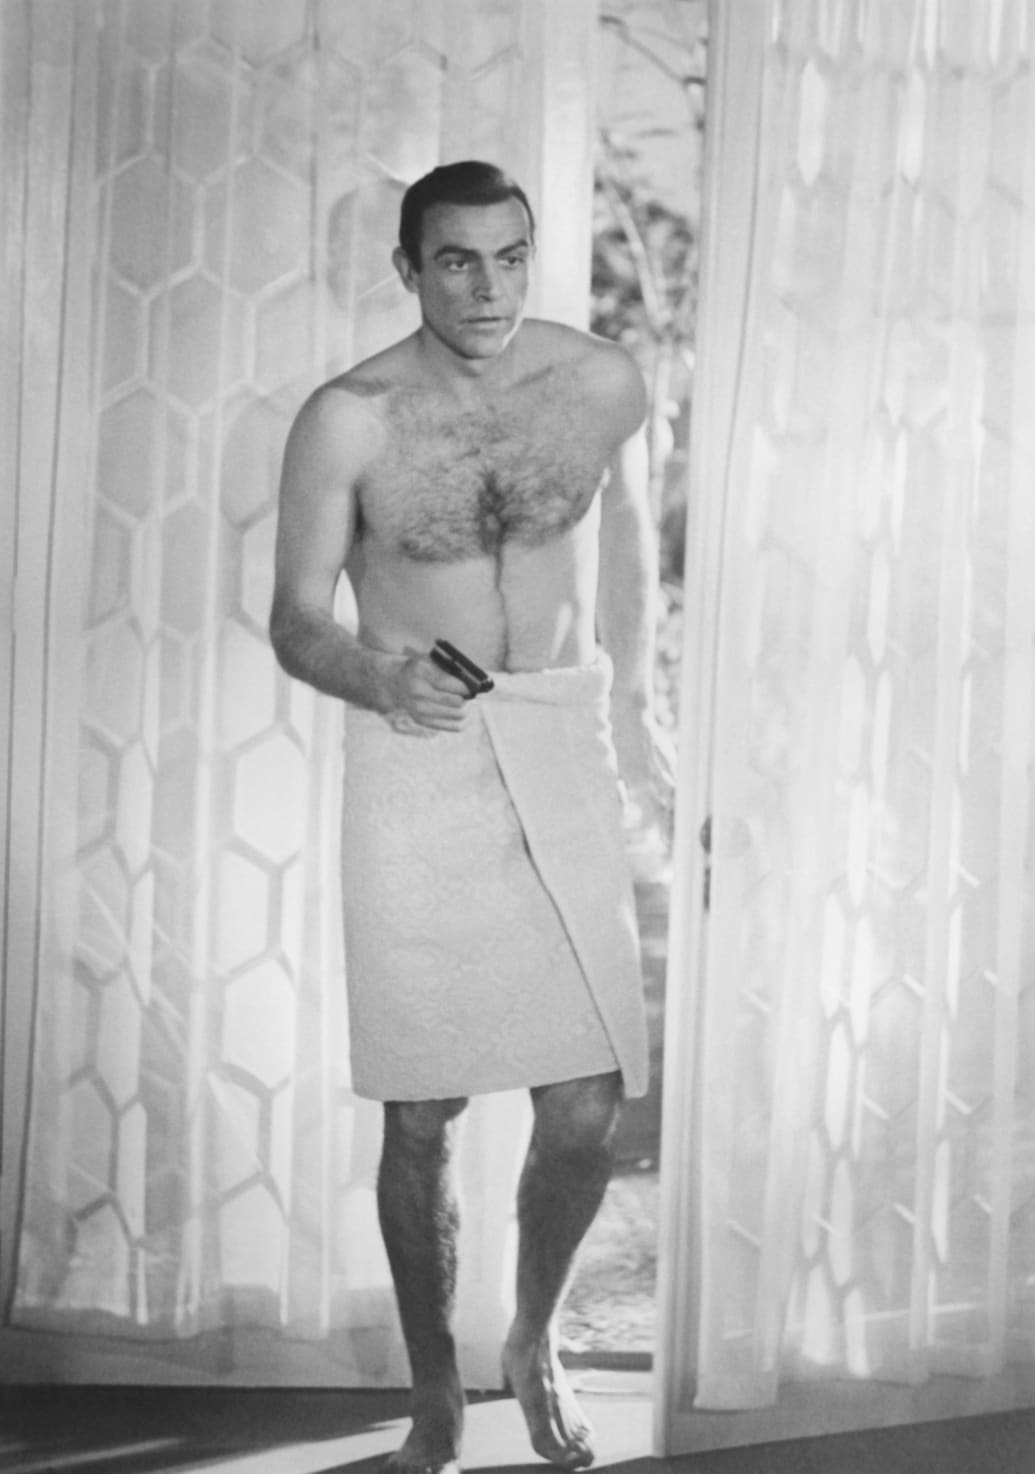 Sean Connery holds gun bare-chested with a towel around his waist as James Bond in the 1963 film From Russia With Love